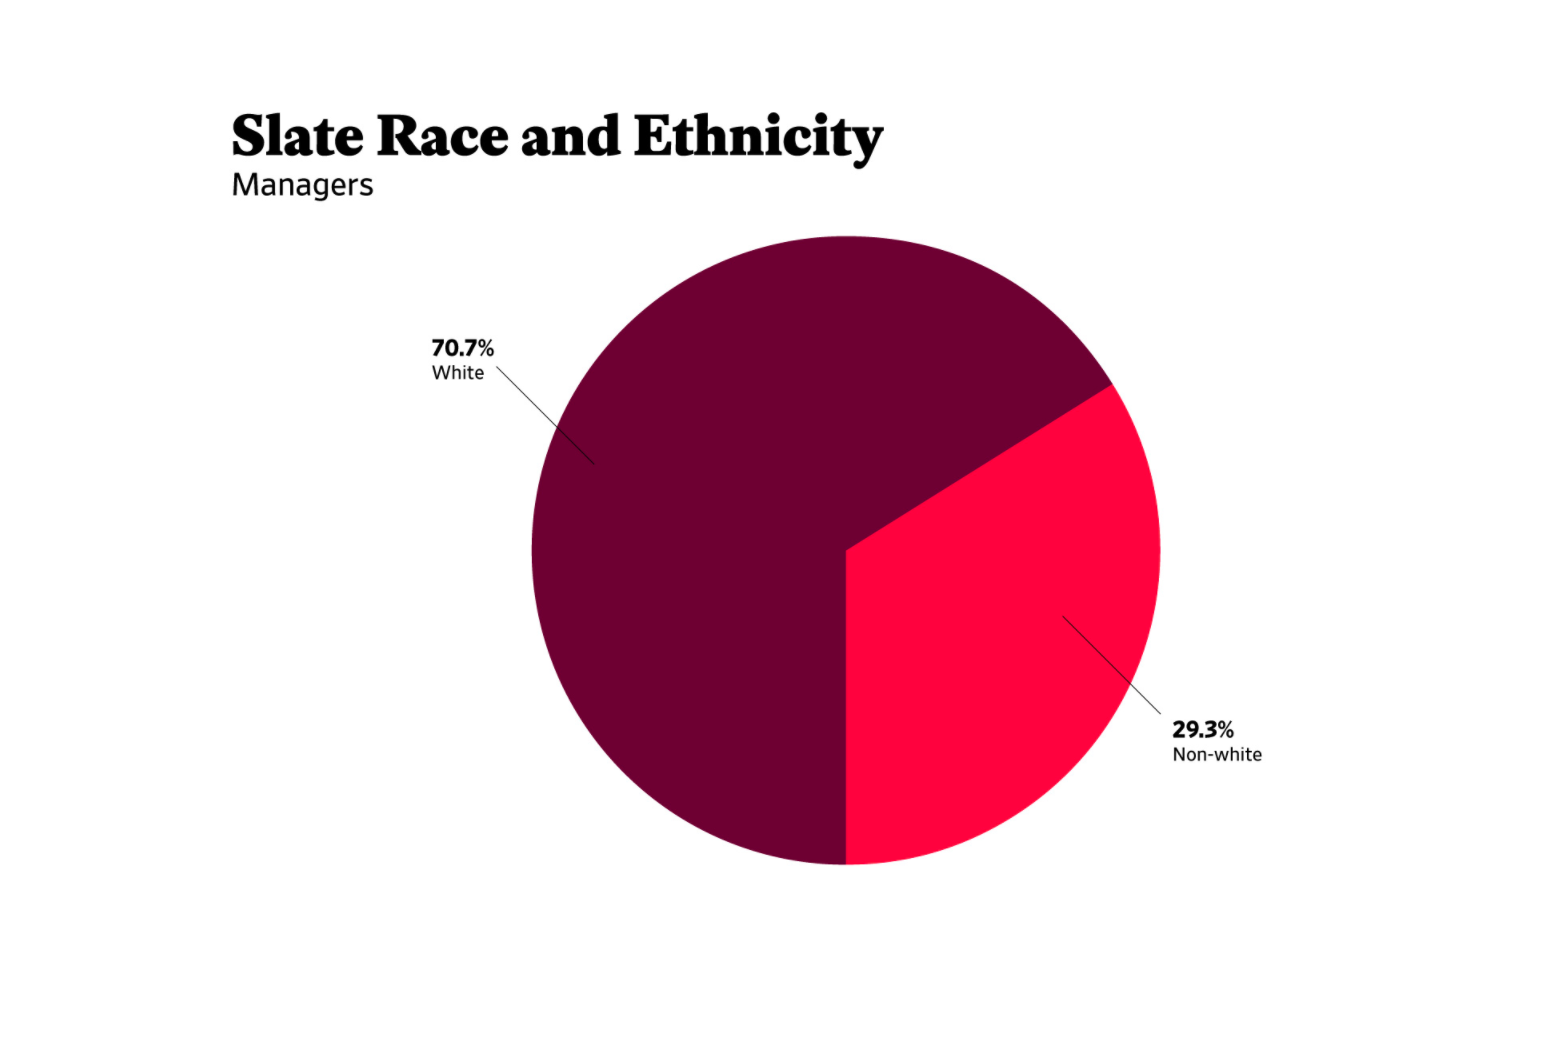 A pie chart showing race and ethnicity of Slate managers.